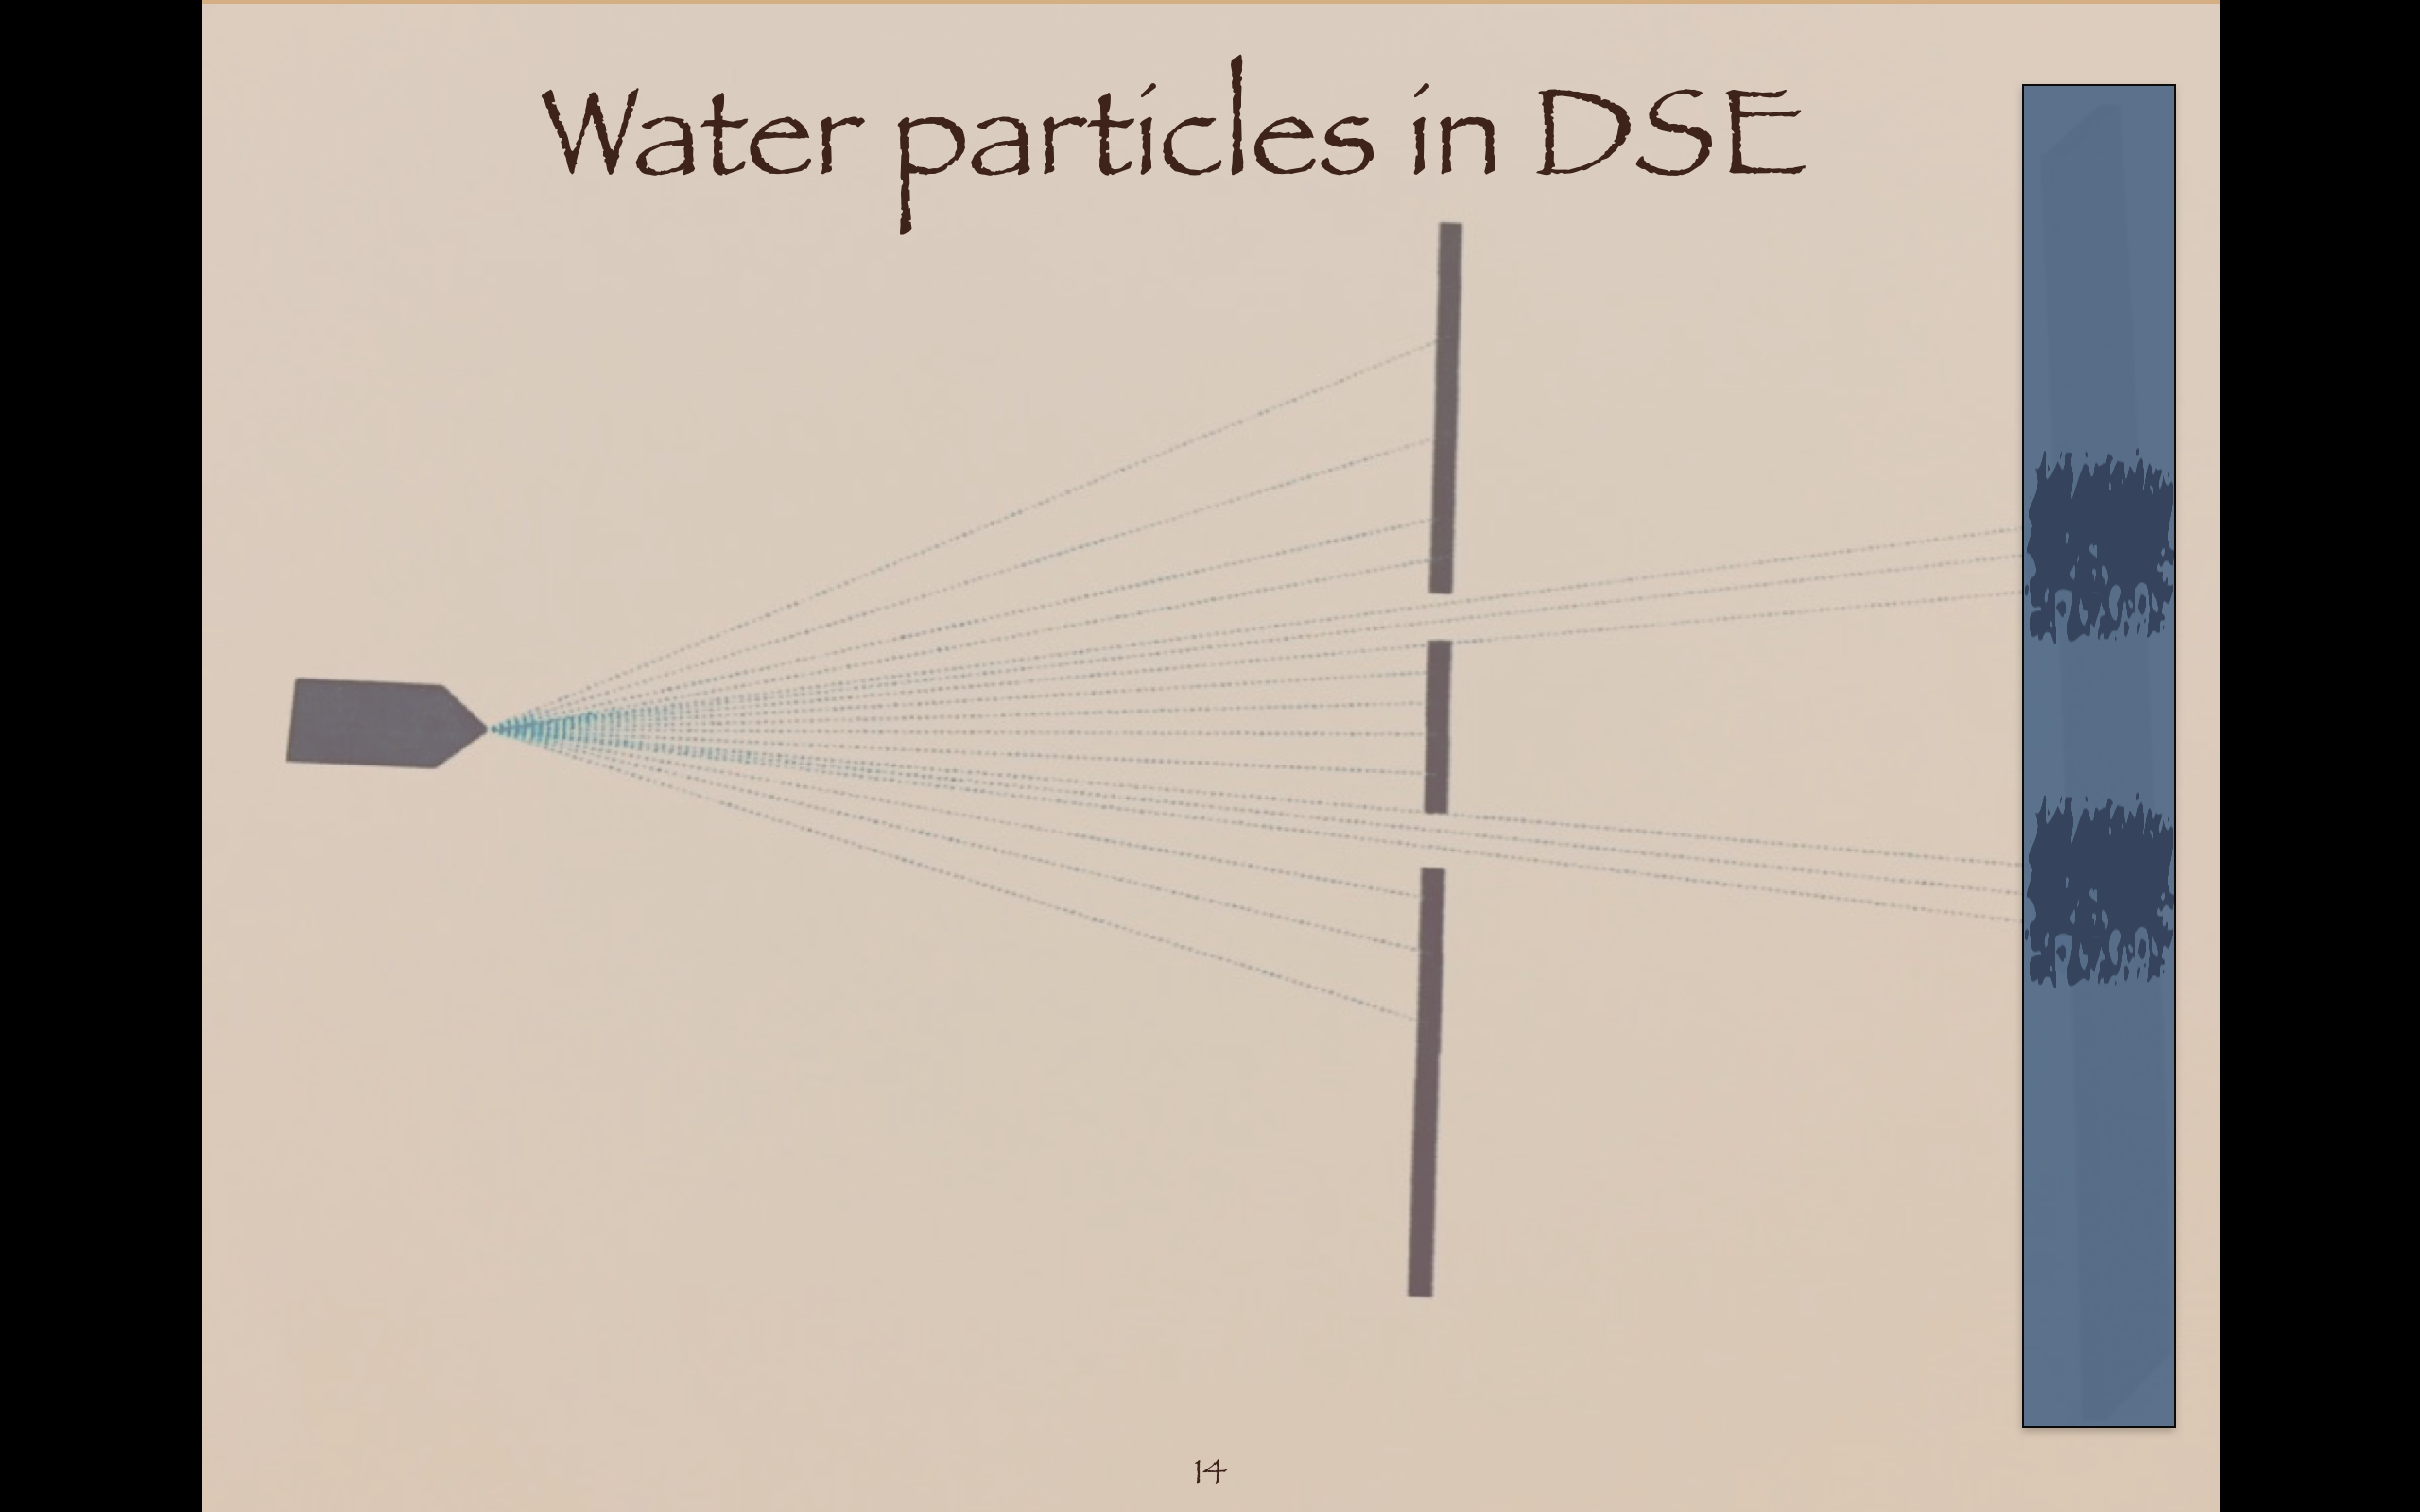 DSE water particles